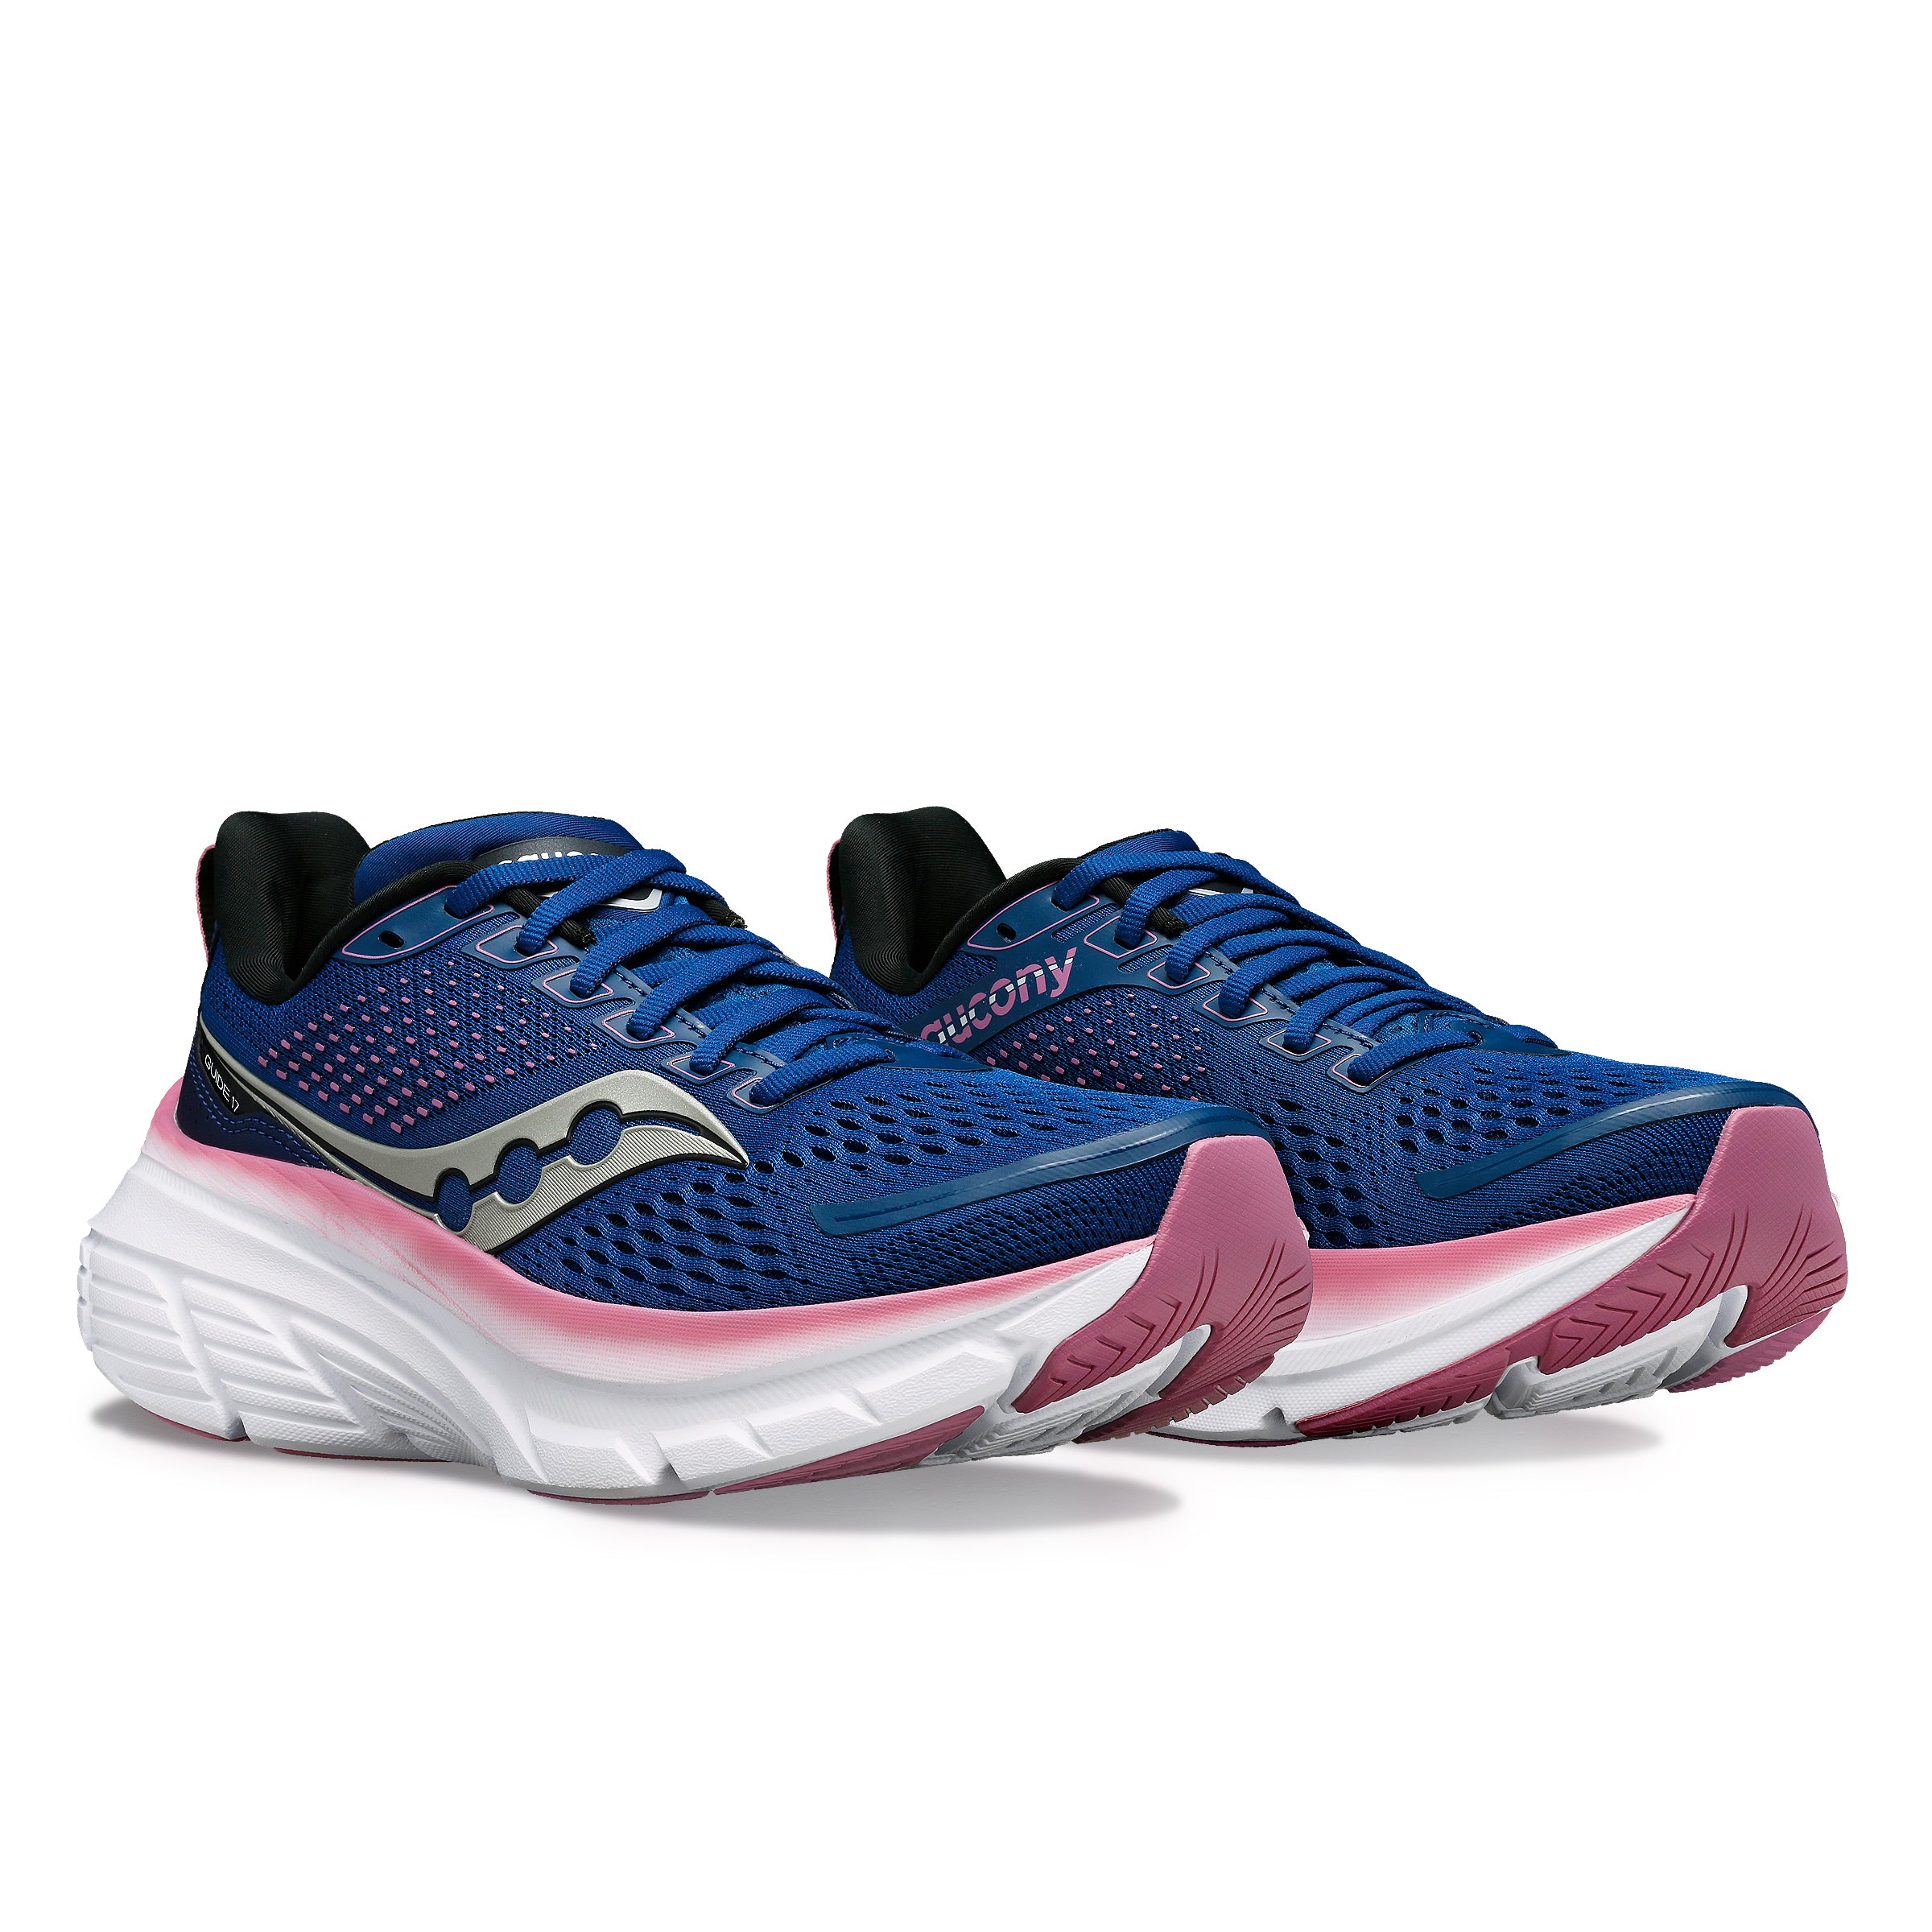 womens guide 17 b 106 navy orchid 